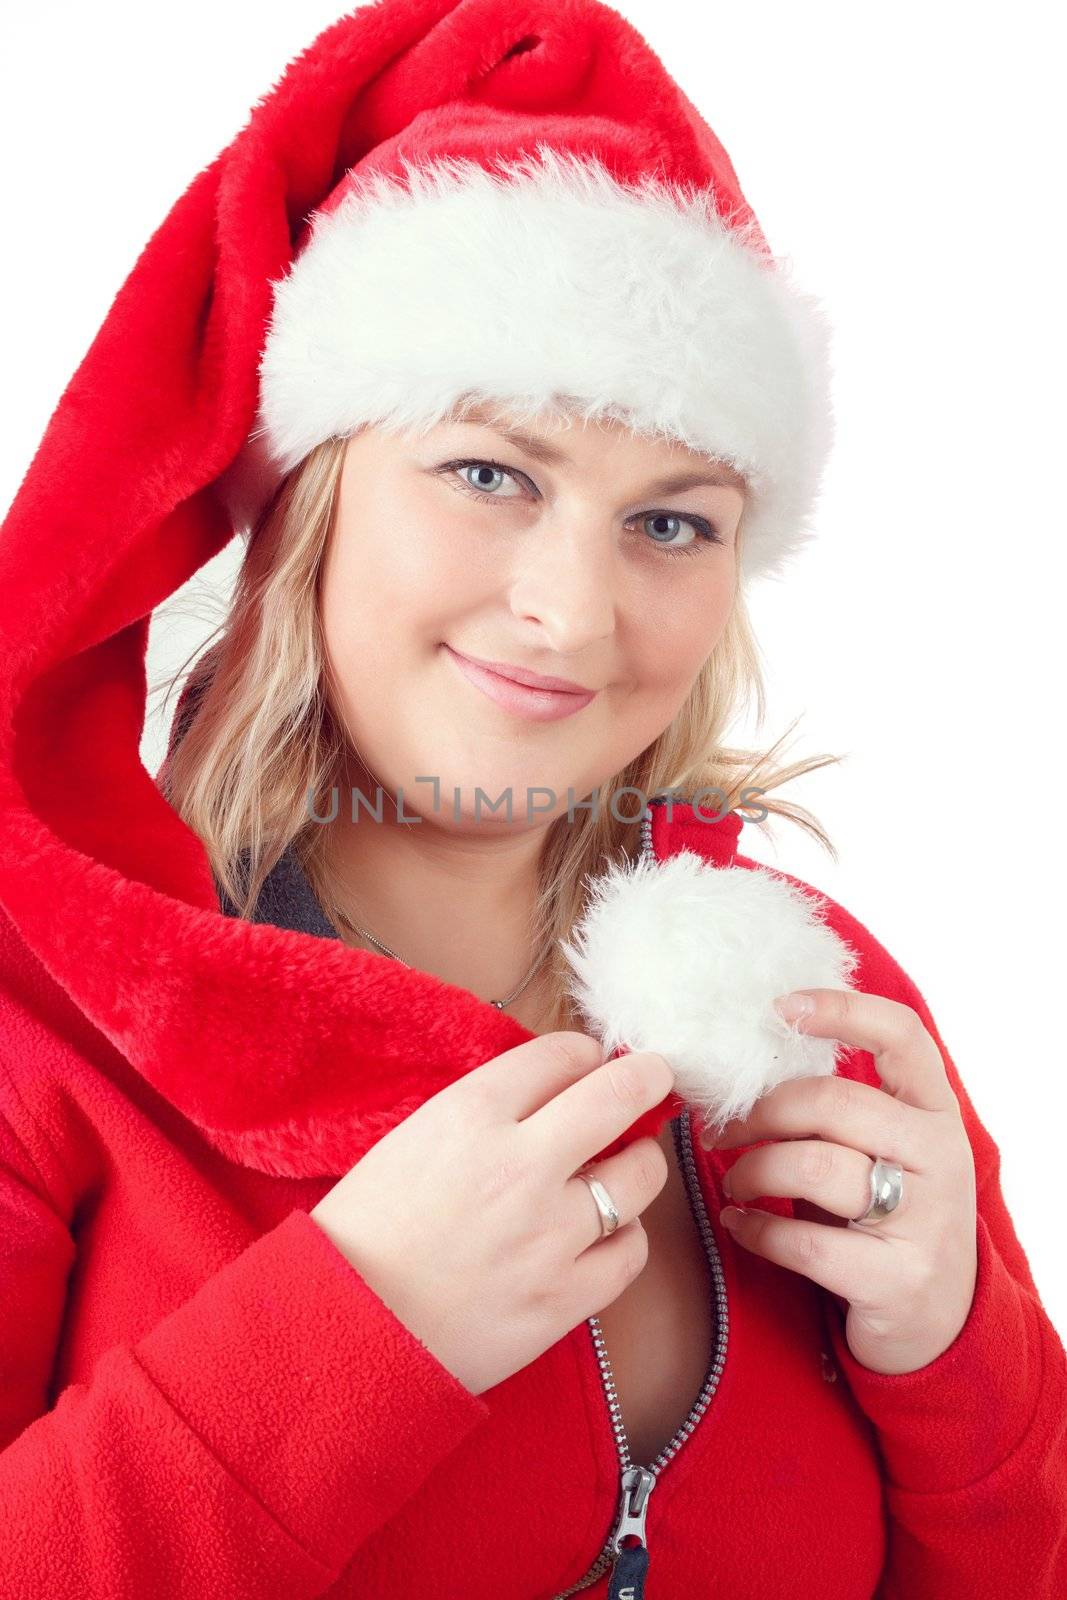 Portrait of joyful pretty woman in red santa claus hat smiling on white background